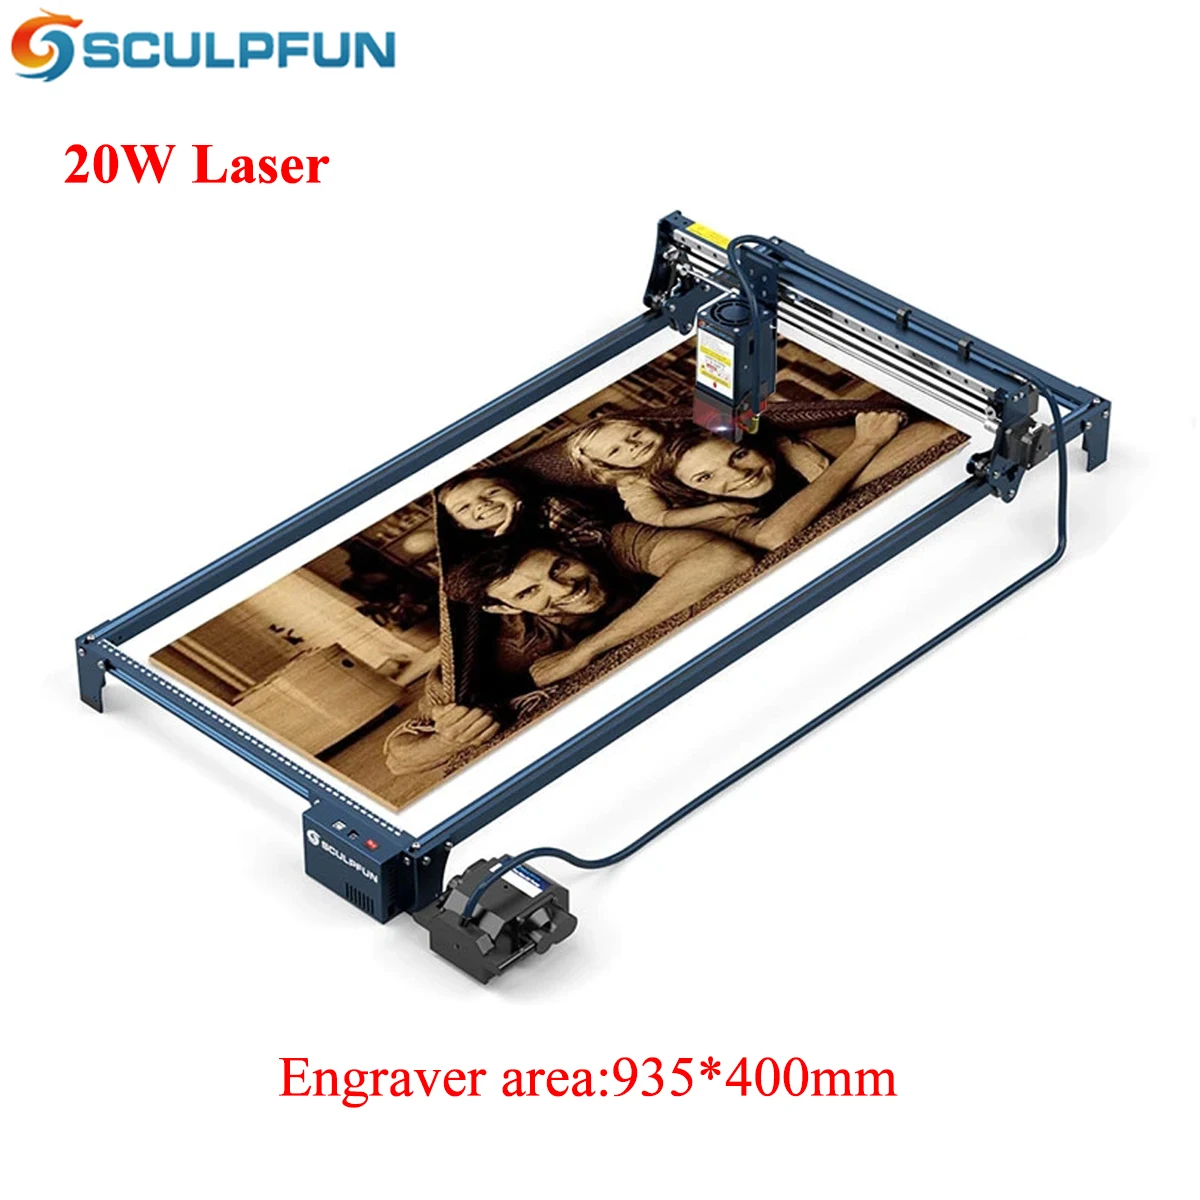 SCULPFUN S30 Pro Max Set Laser Engraver 935*410mm Exprand Kit Area with Automatic Air-assist System 130W Power Engraving Machine